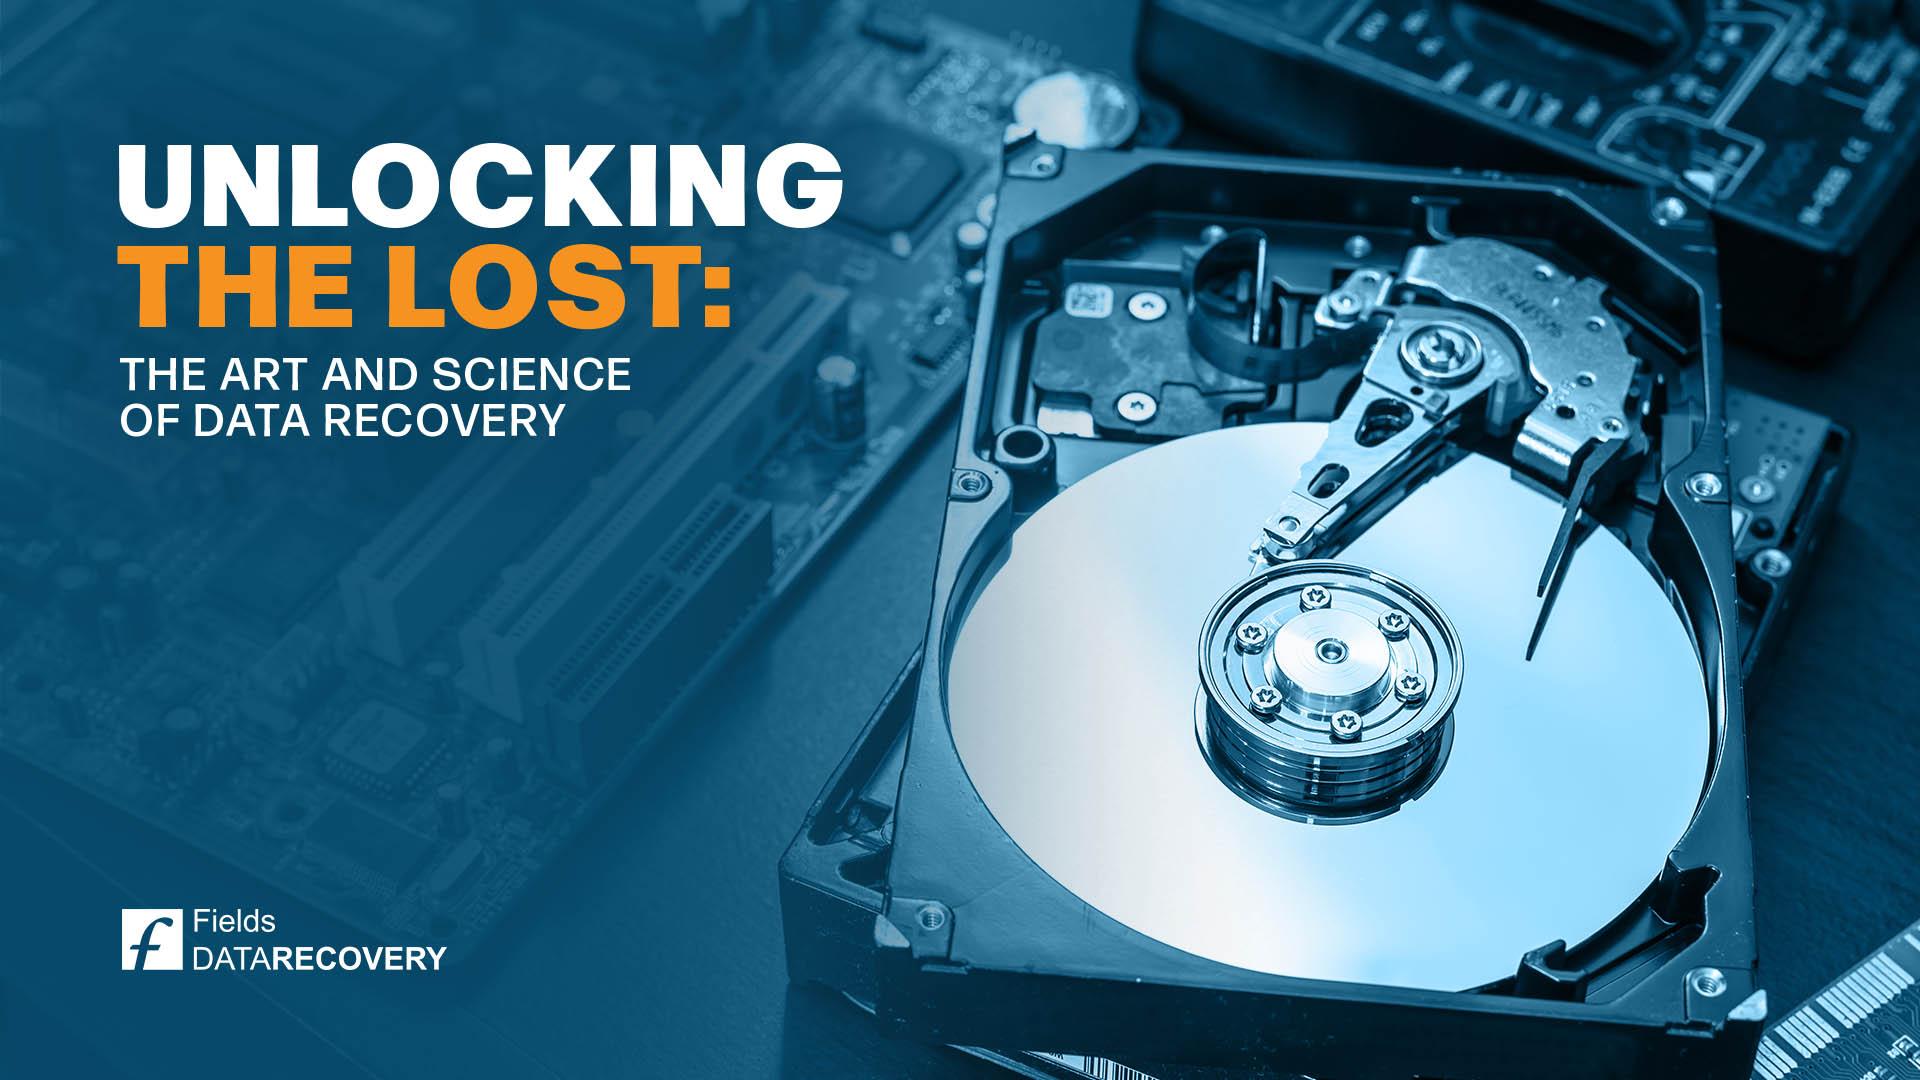 Unlocking the Lost: The Art and Science of Data Recovery